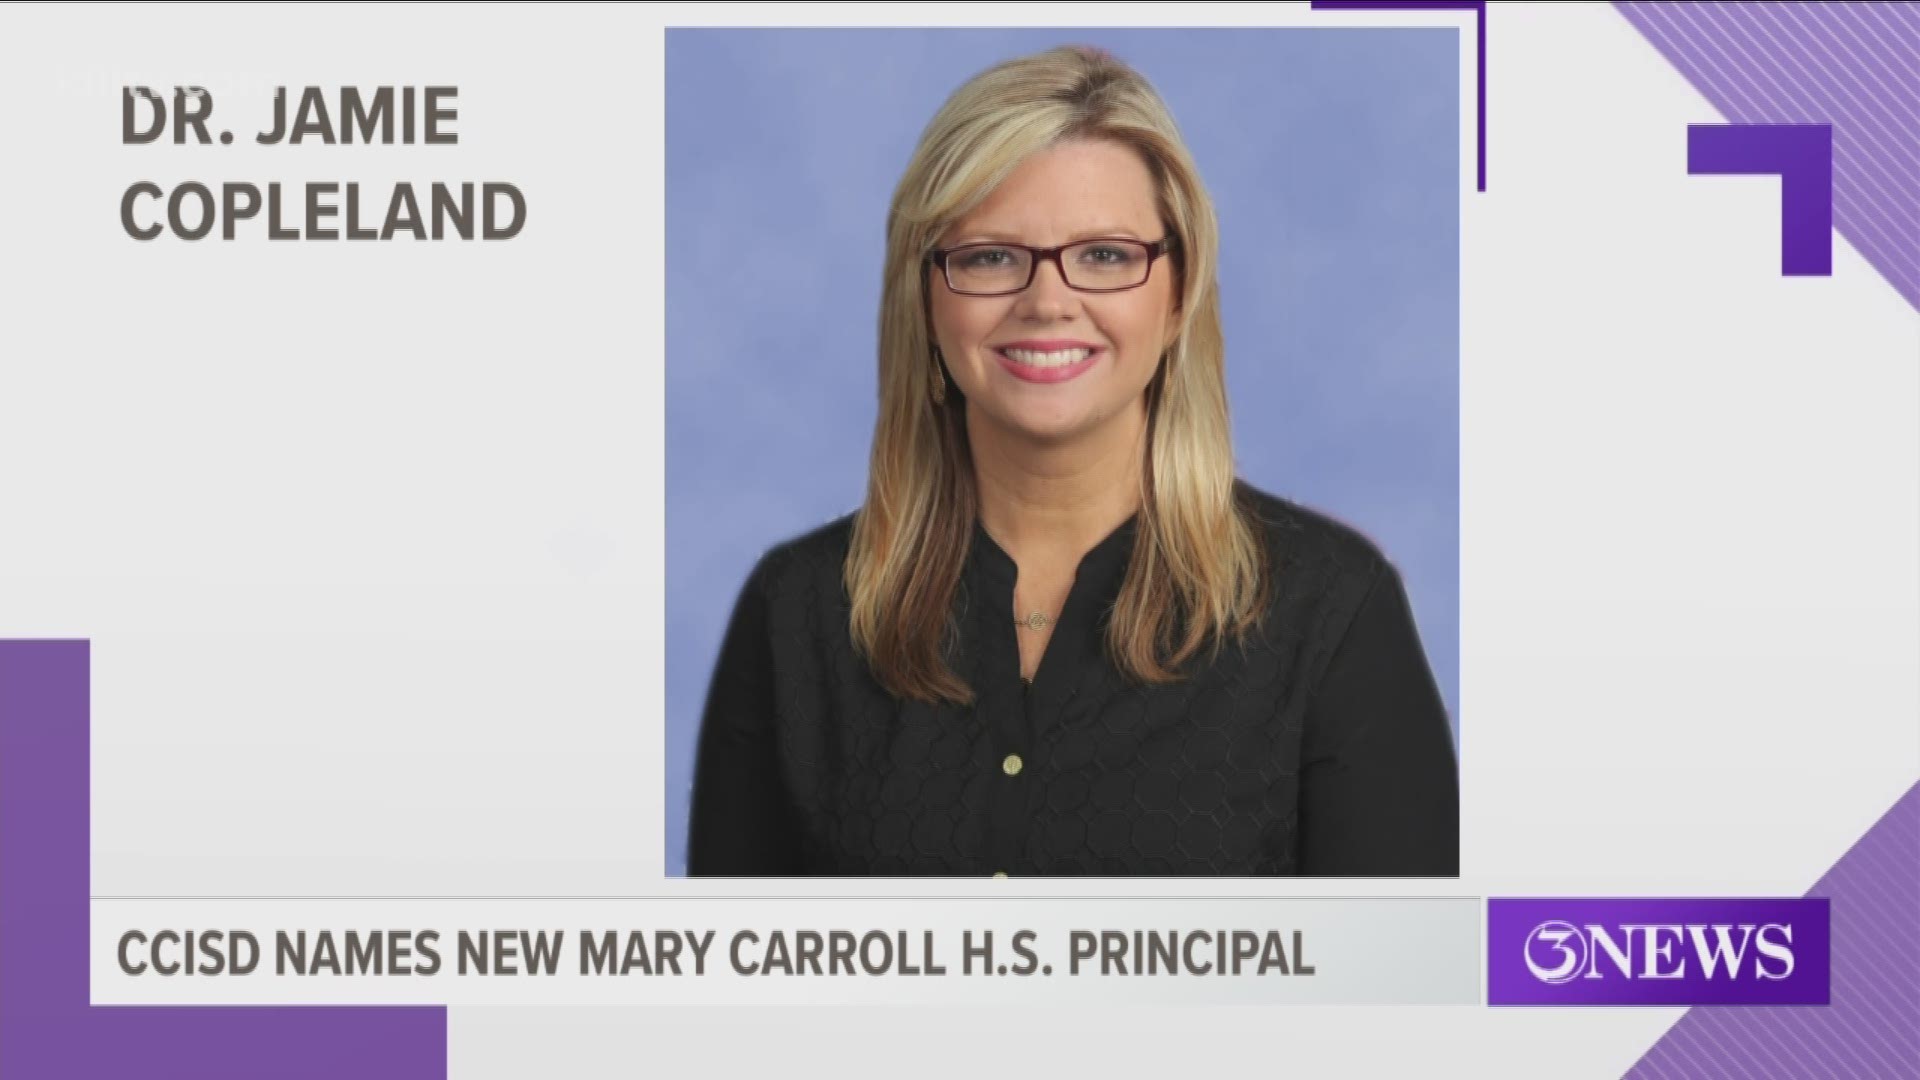 The Corpus Christi Independent School District has named a new principal for Mary Carroll High School.